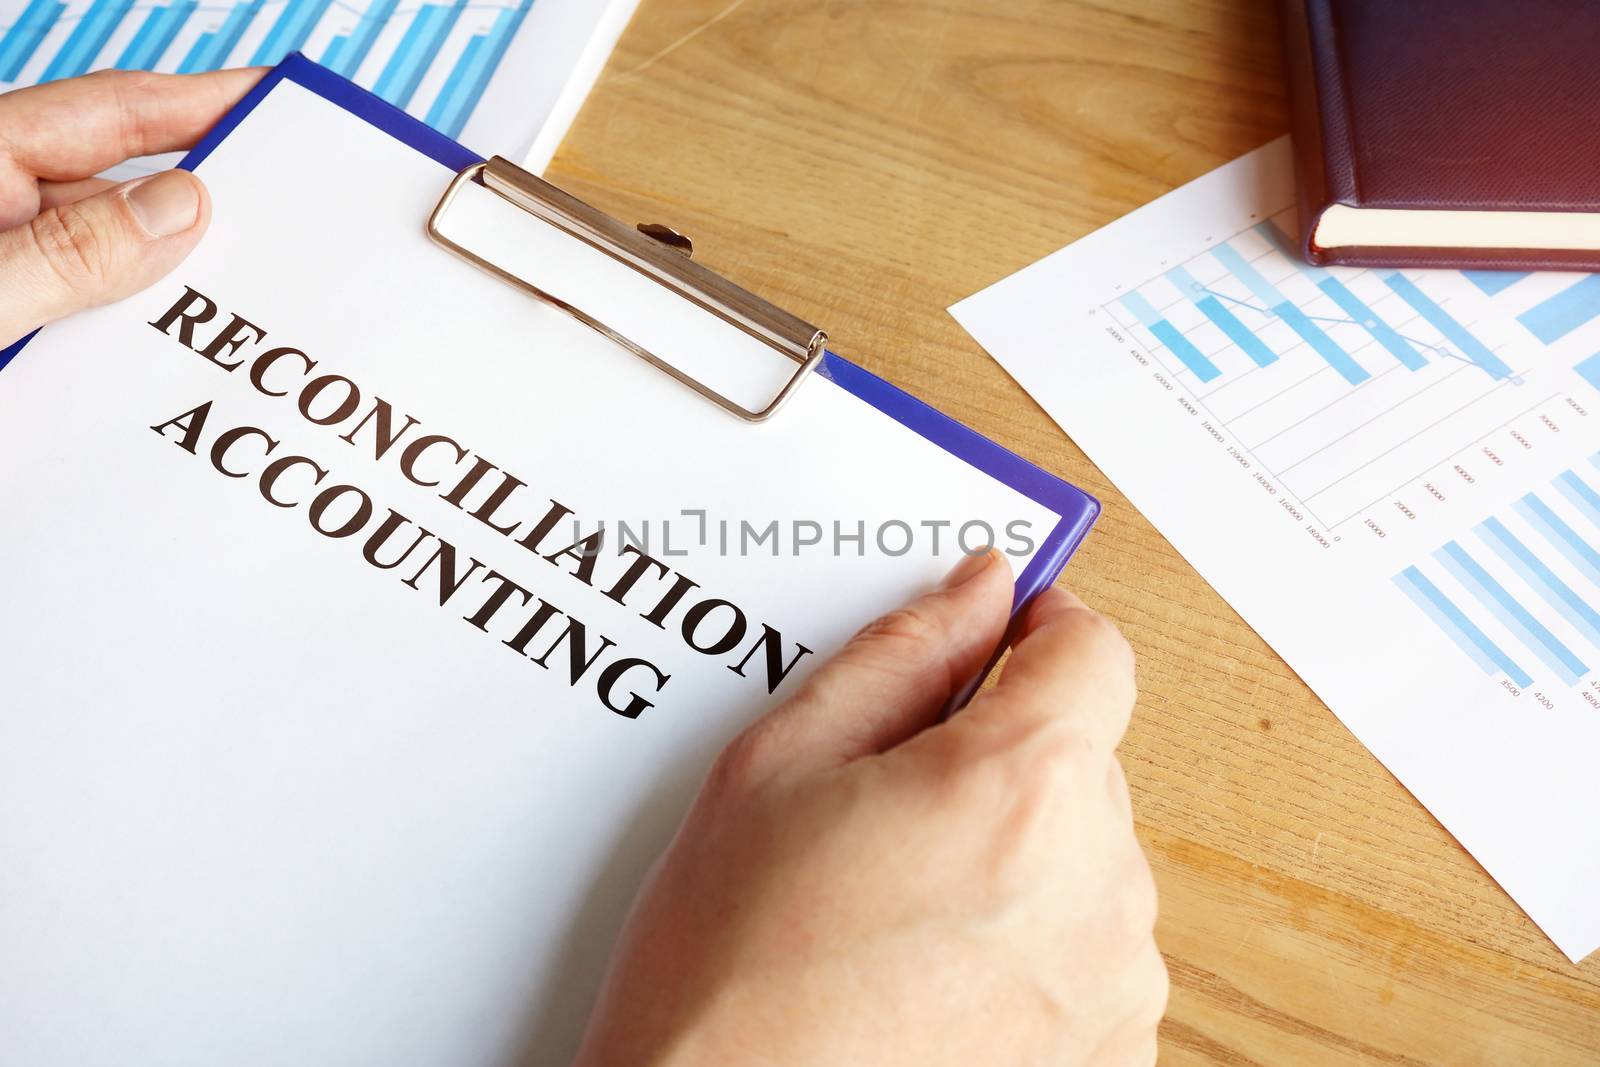 Reconciliation accounting papers in the accountant hand. by designer491